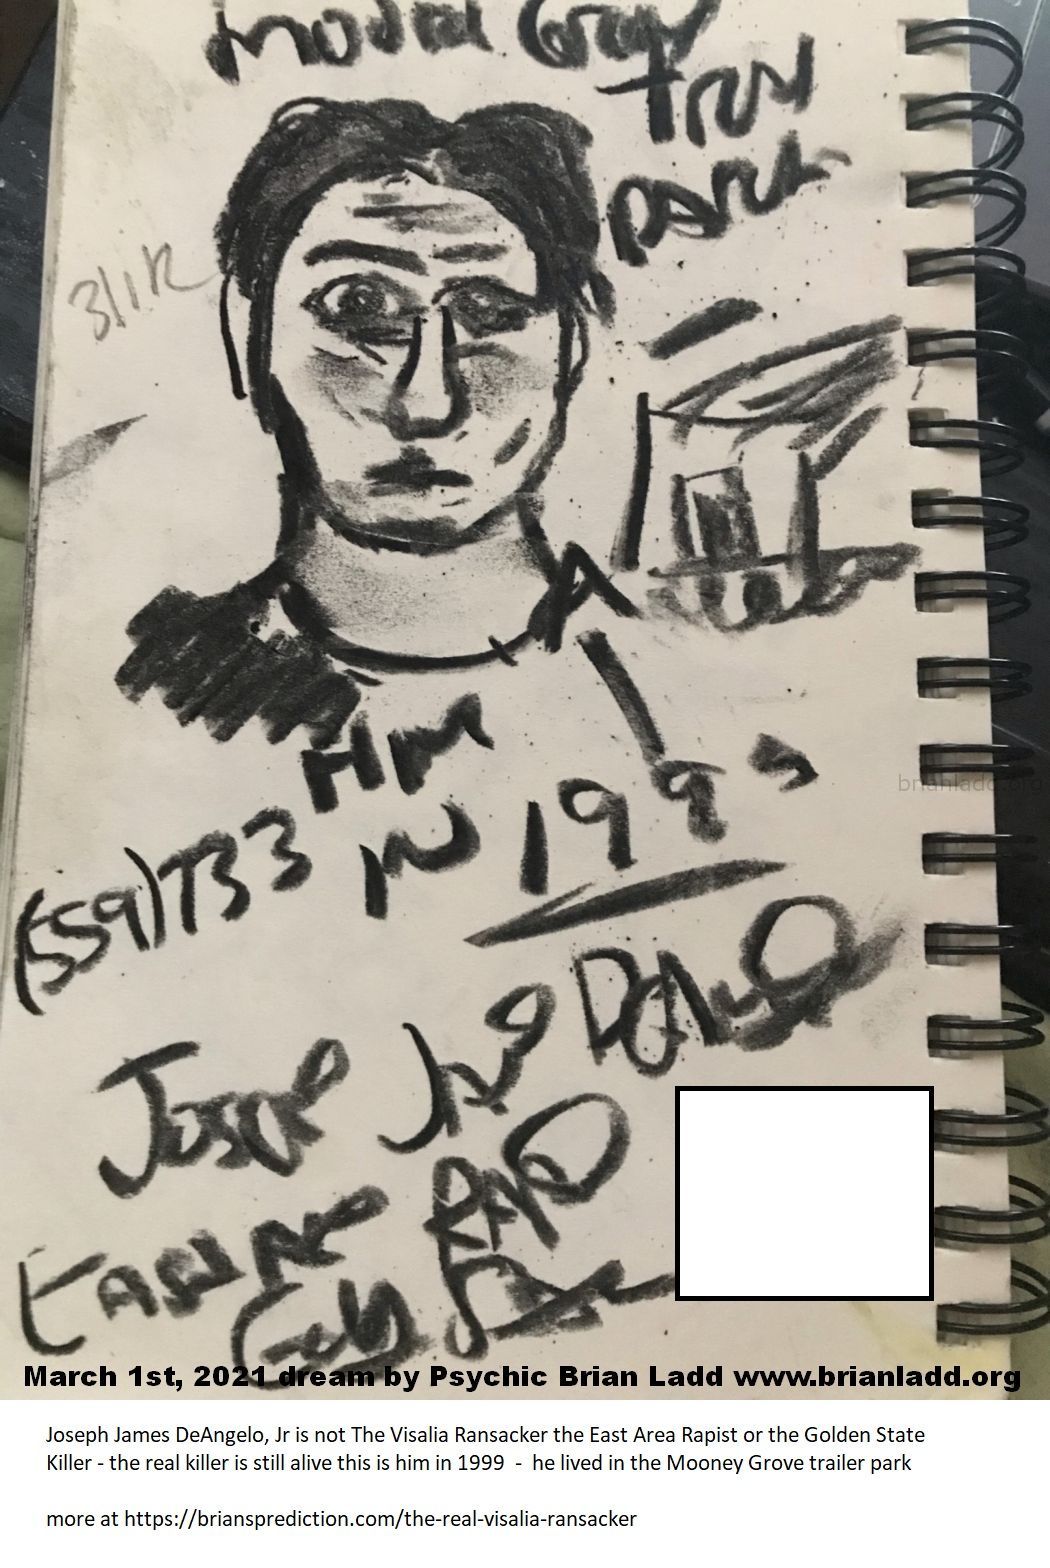 14544 1 March 2021 1 - Joseph James Deangelo, Jr Is Not The Visalia Ransacker The East Area Rapist Or The Golden State K...
Joseph James Deangelo, Jr Is Not The Visalia Ransacker The East Area Rapist Or The Golden State Killer - The Real Killer Is Still Alive This Is Him In 1999  -  He Lived In The Mooney Grove Trailer Park  More At   https://briansprediction.com/The-Real-Visalia-Ransacker
